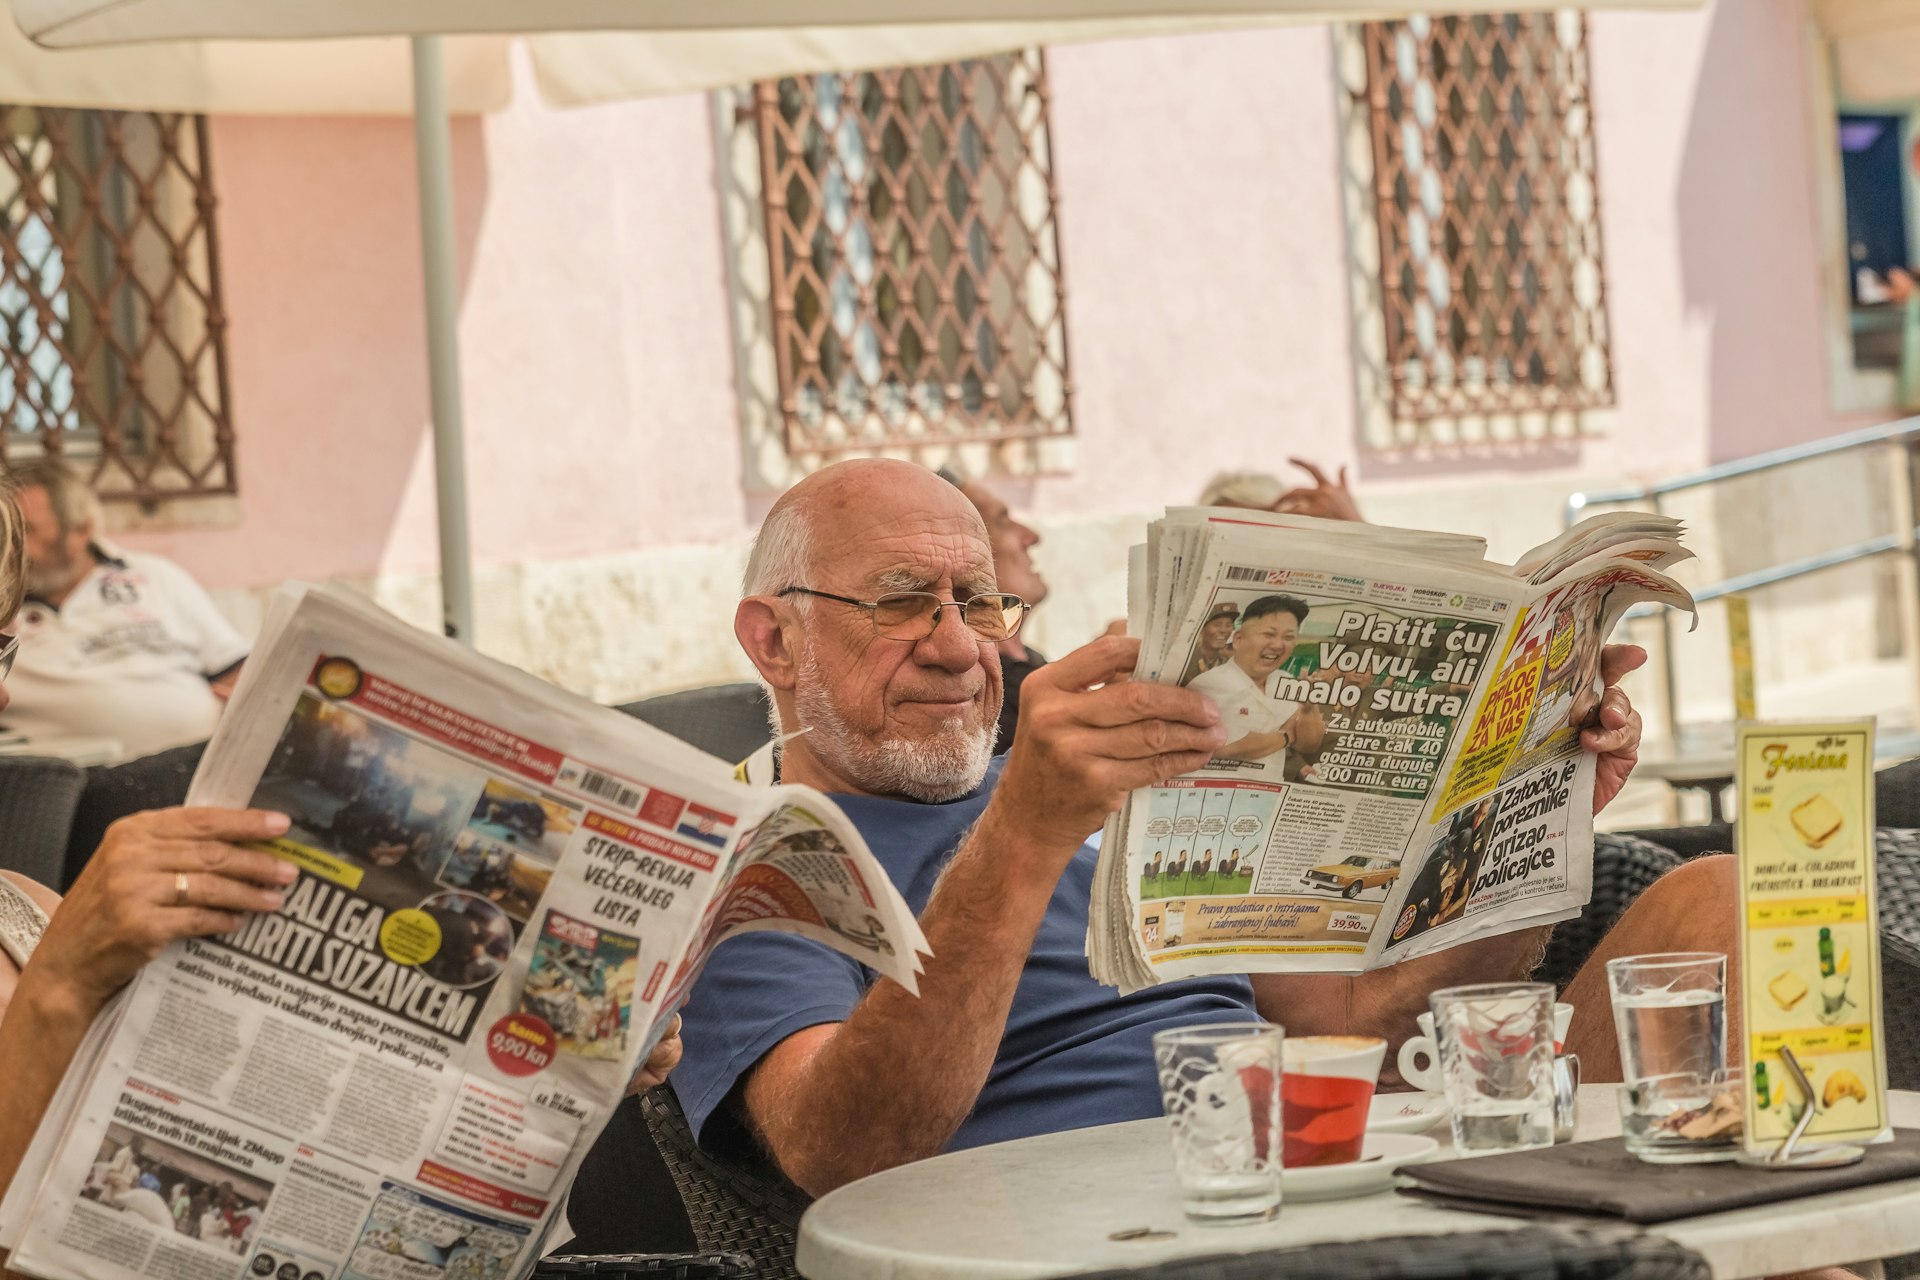 Men in a cafe read newspapers and drink coffee in the old town of Rovinj, Croatia